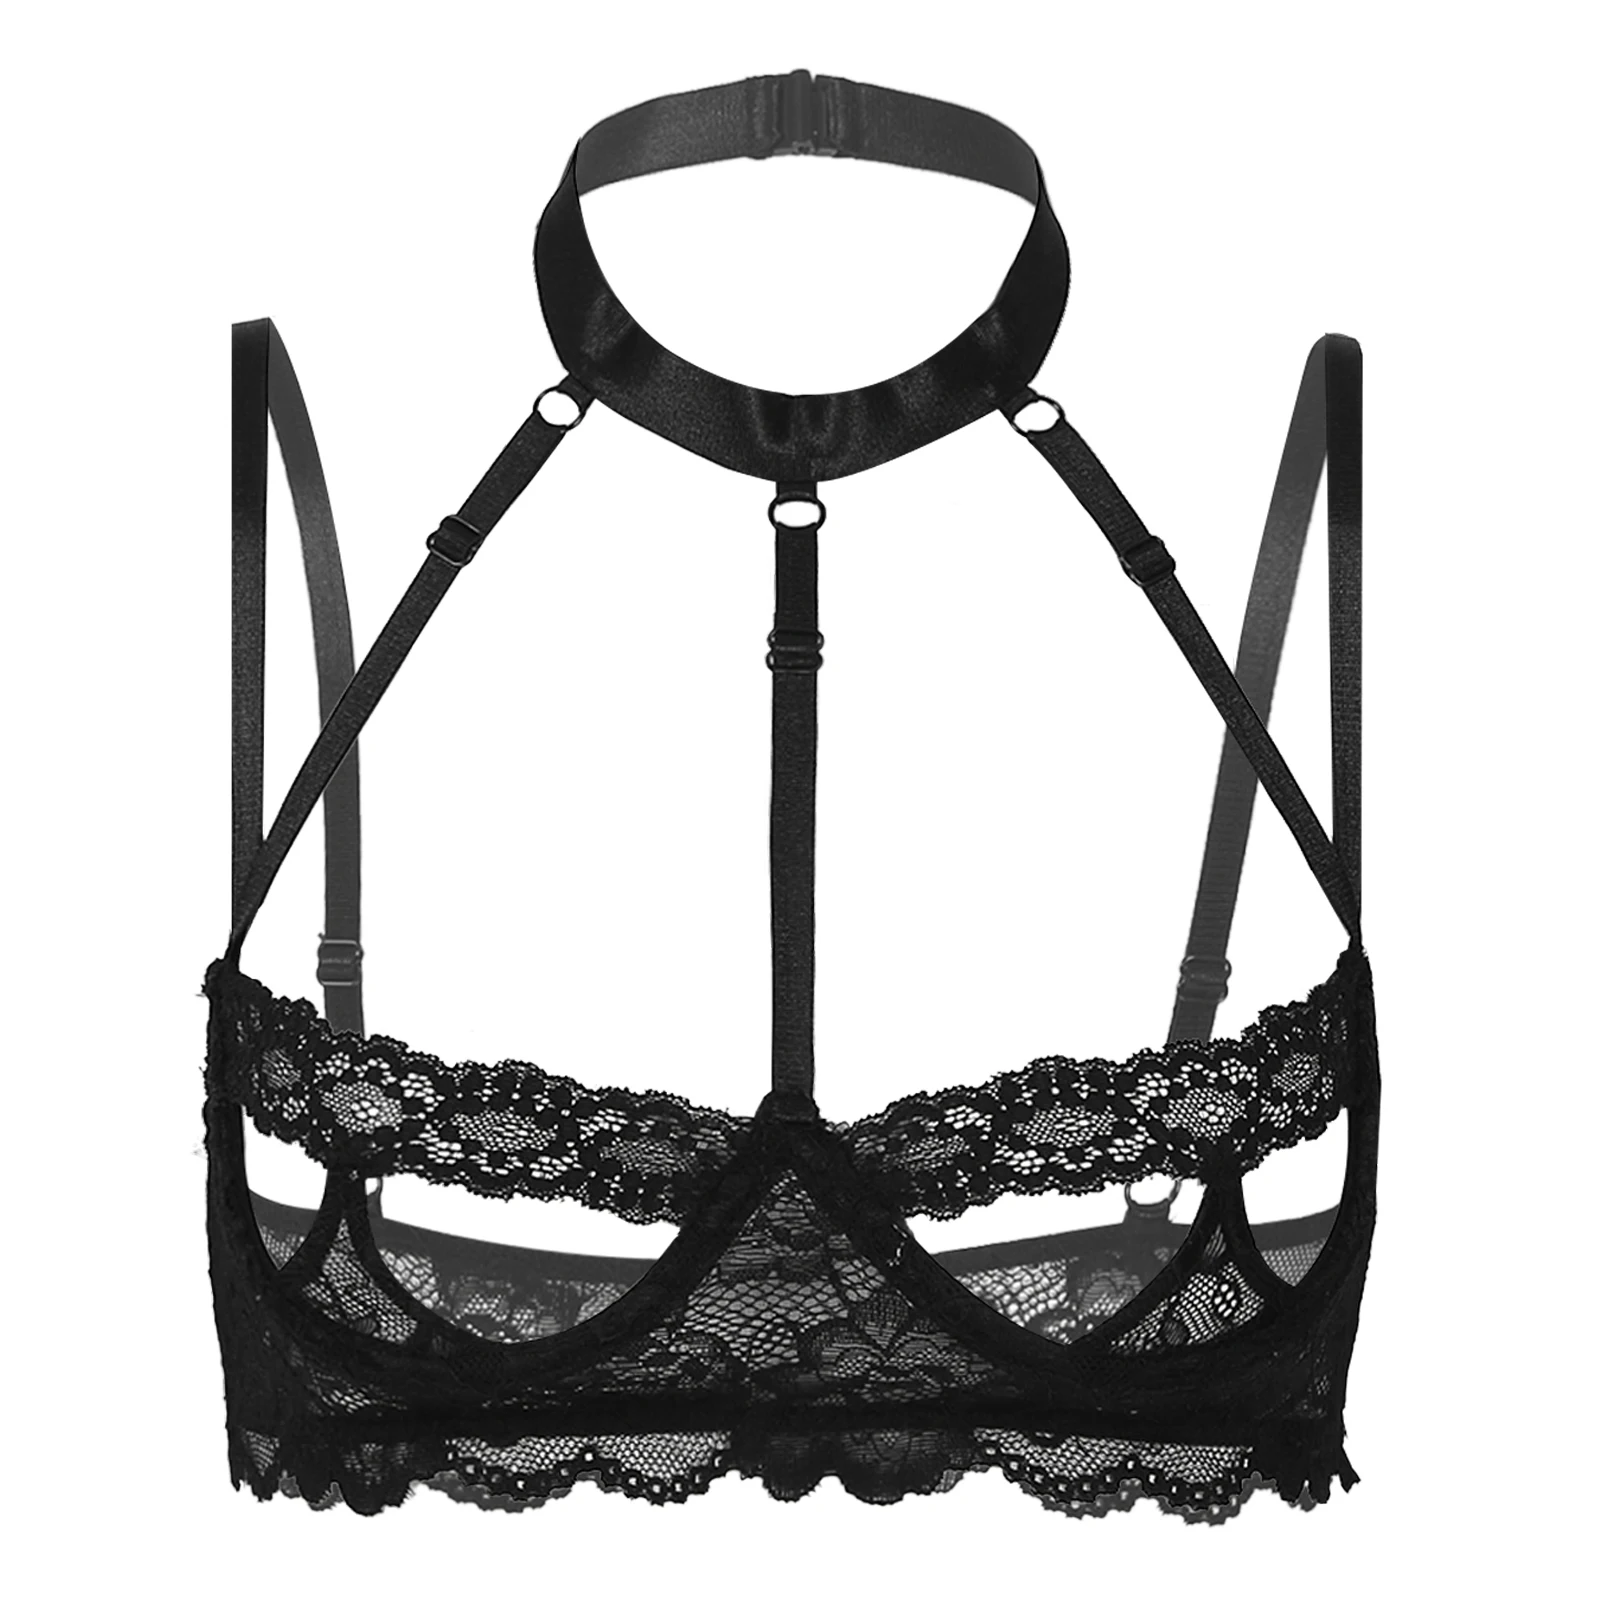 

Sexy Bras for Women Hollow Out Unlined Underwired Sexy Half Cup Bra Top Halter Strappy Sheer Lace Brassiere Lingerie Underwear